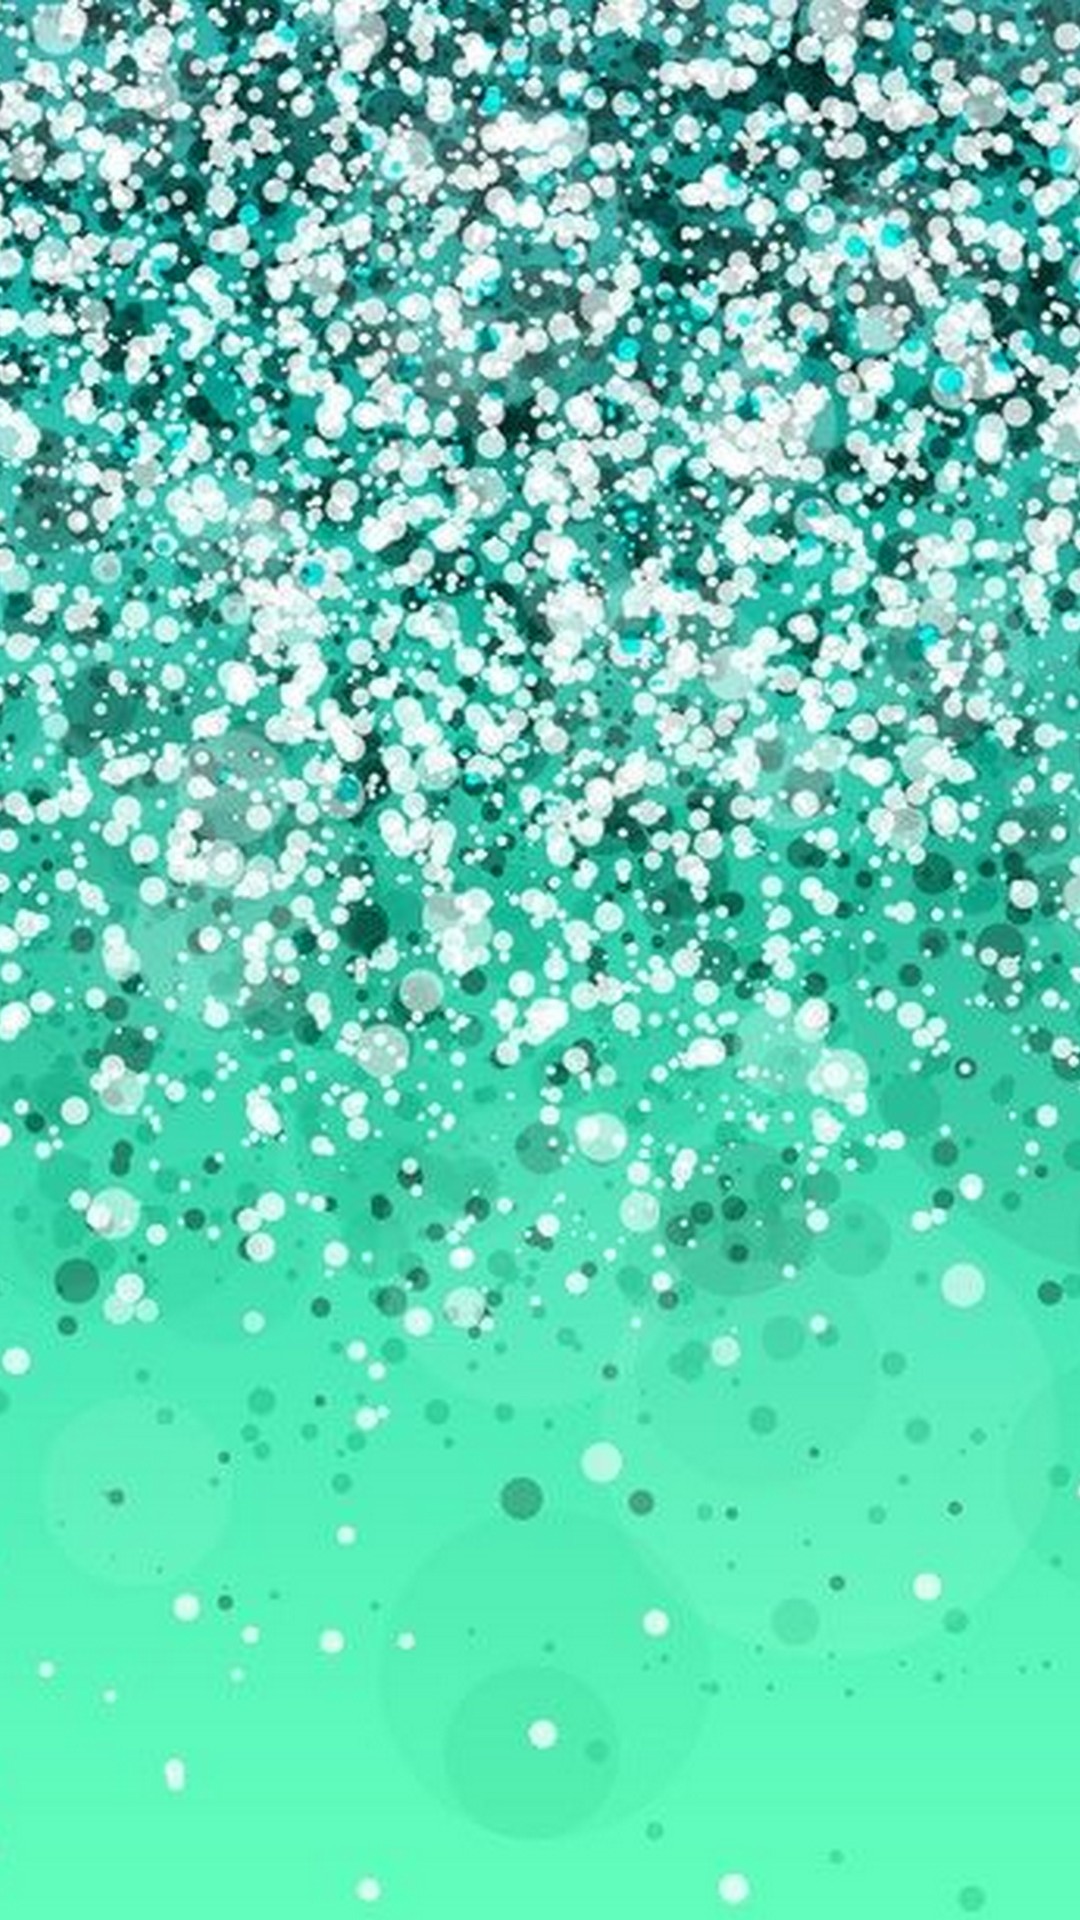 Green Colour Backgrounds For Android with image resolution 1080x1920 pixel. You can make this wallpaper for your Android backgrounds, Tablet, Smartphones Screensavers and Mobile Phone Lock Screen